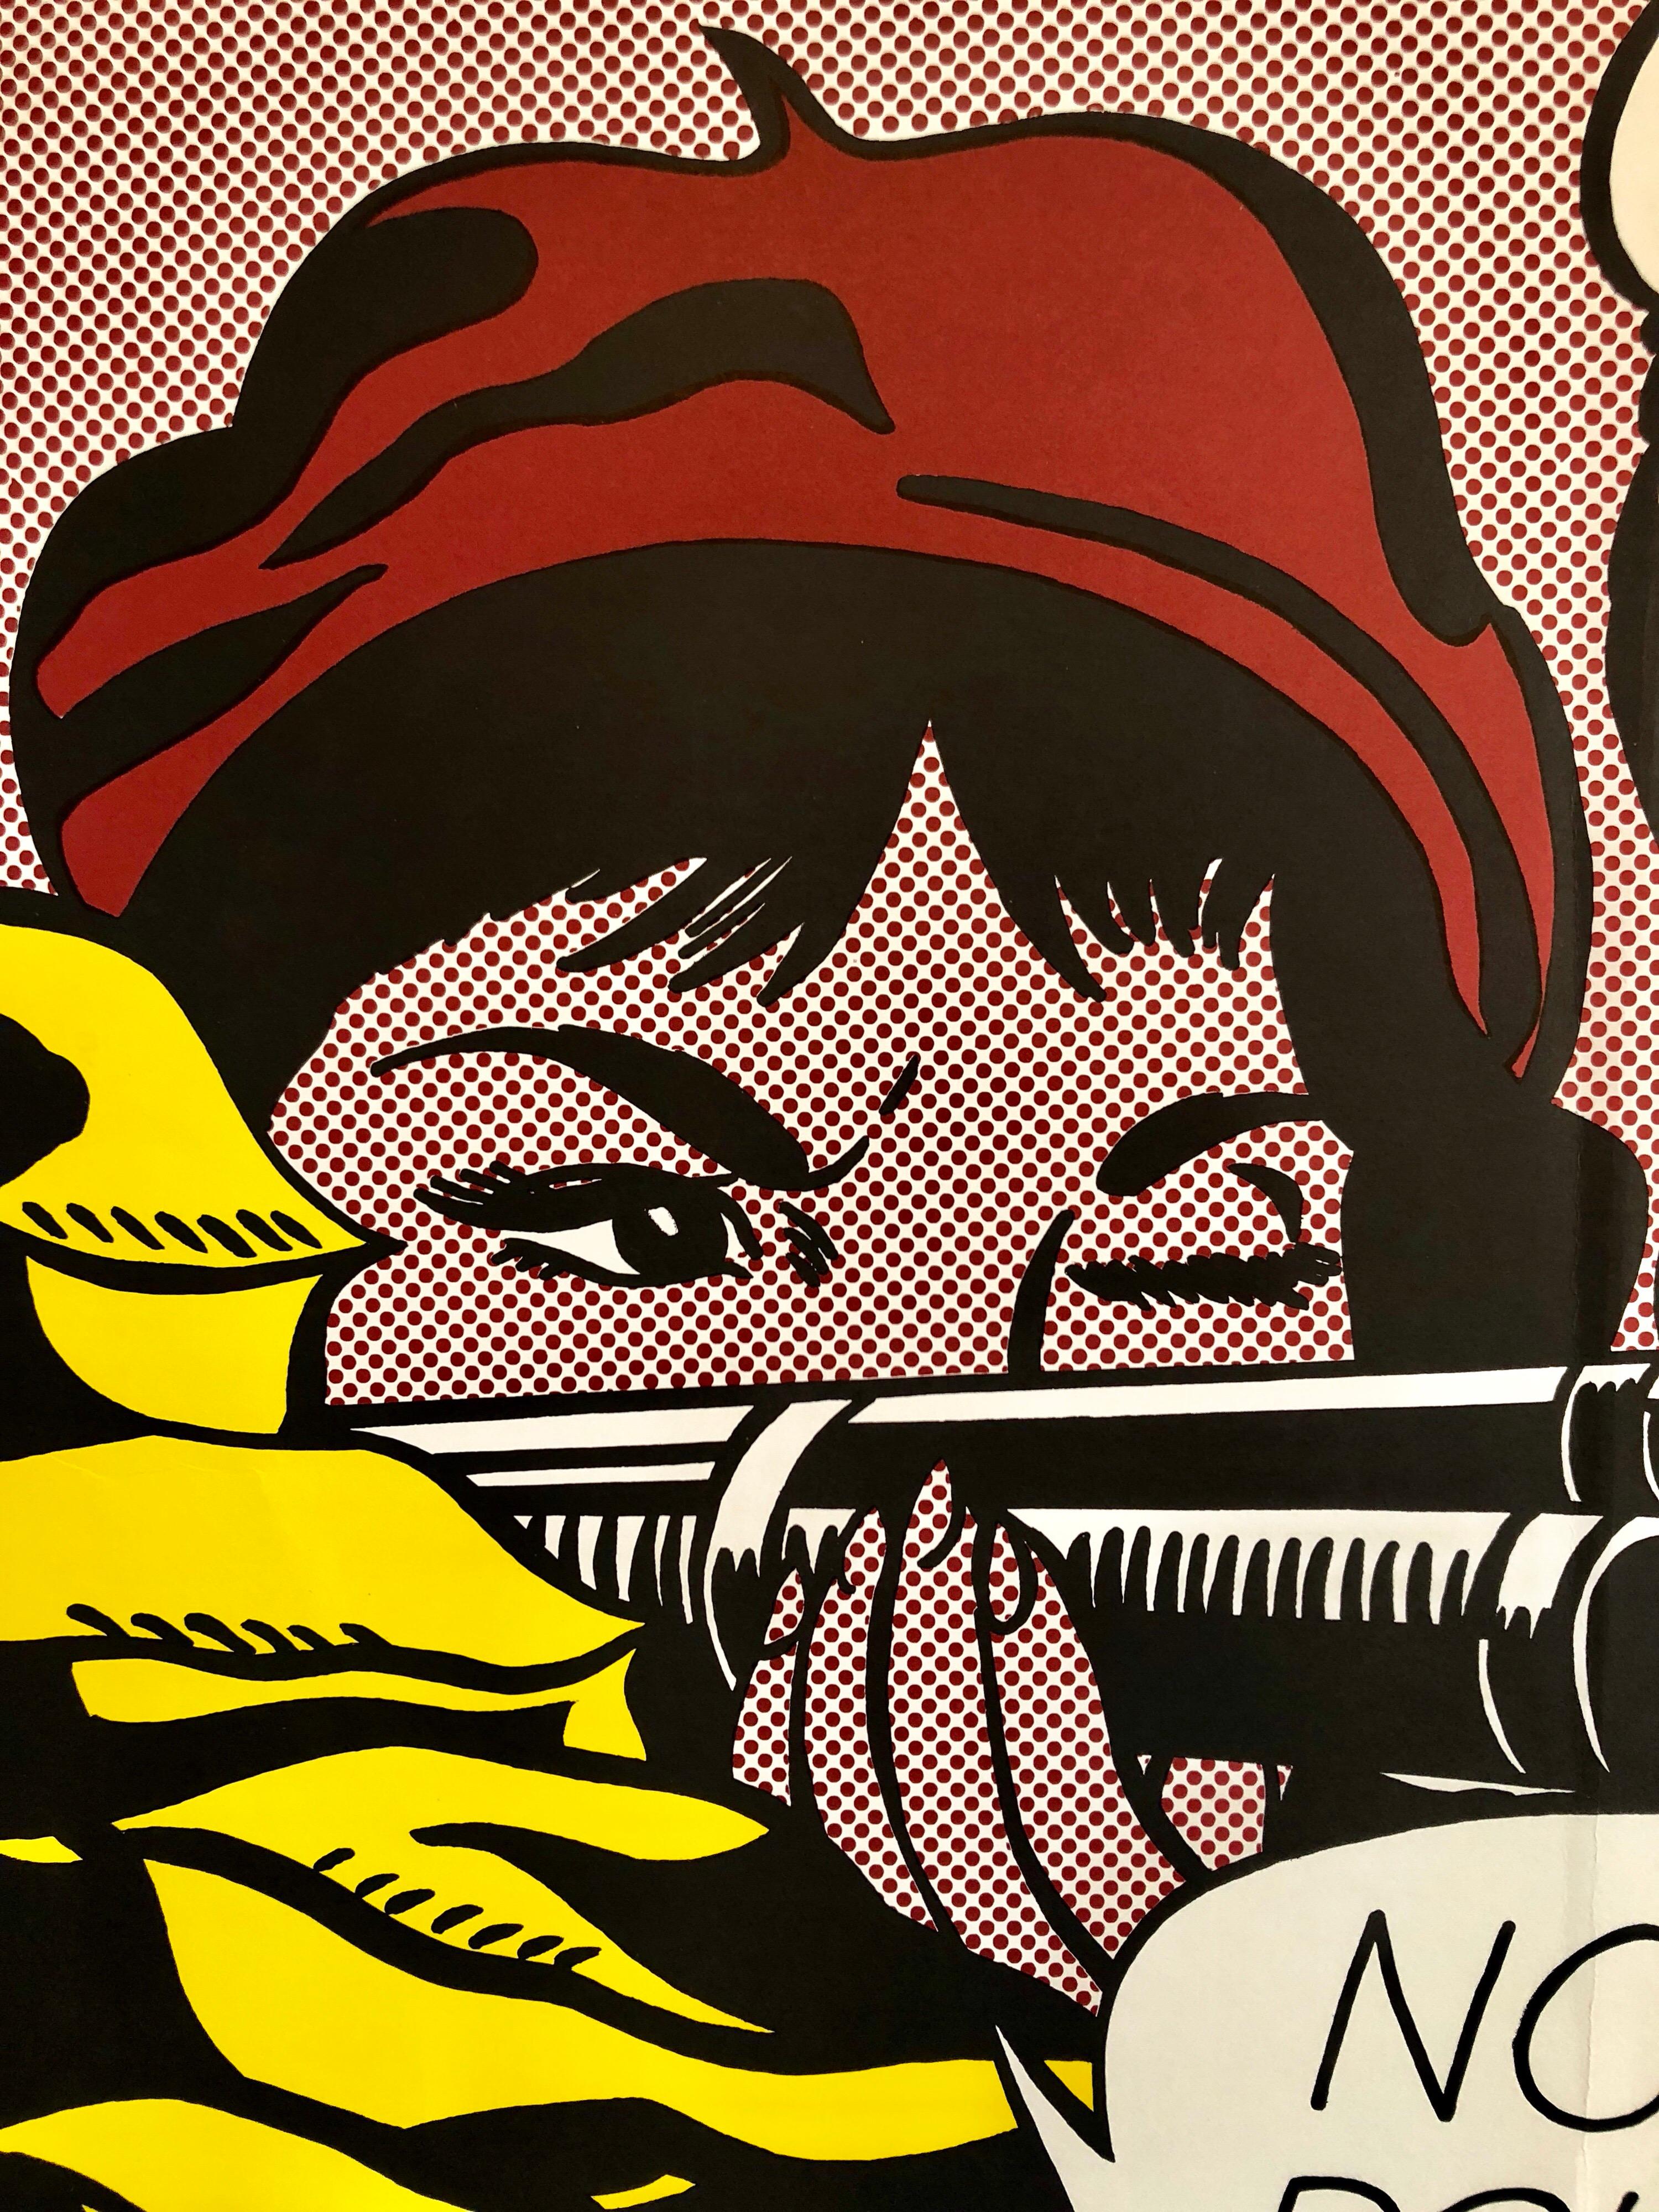 This is a offset lithograph in colors. it is a beautiful piece in nice condition. this is not signed in pencil.
Crak! (sometimes Crack!) is a 1963 pop art lithograph by Roy Lichtenstein in his comic book style of using Ben-Day dots and a text